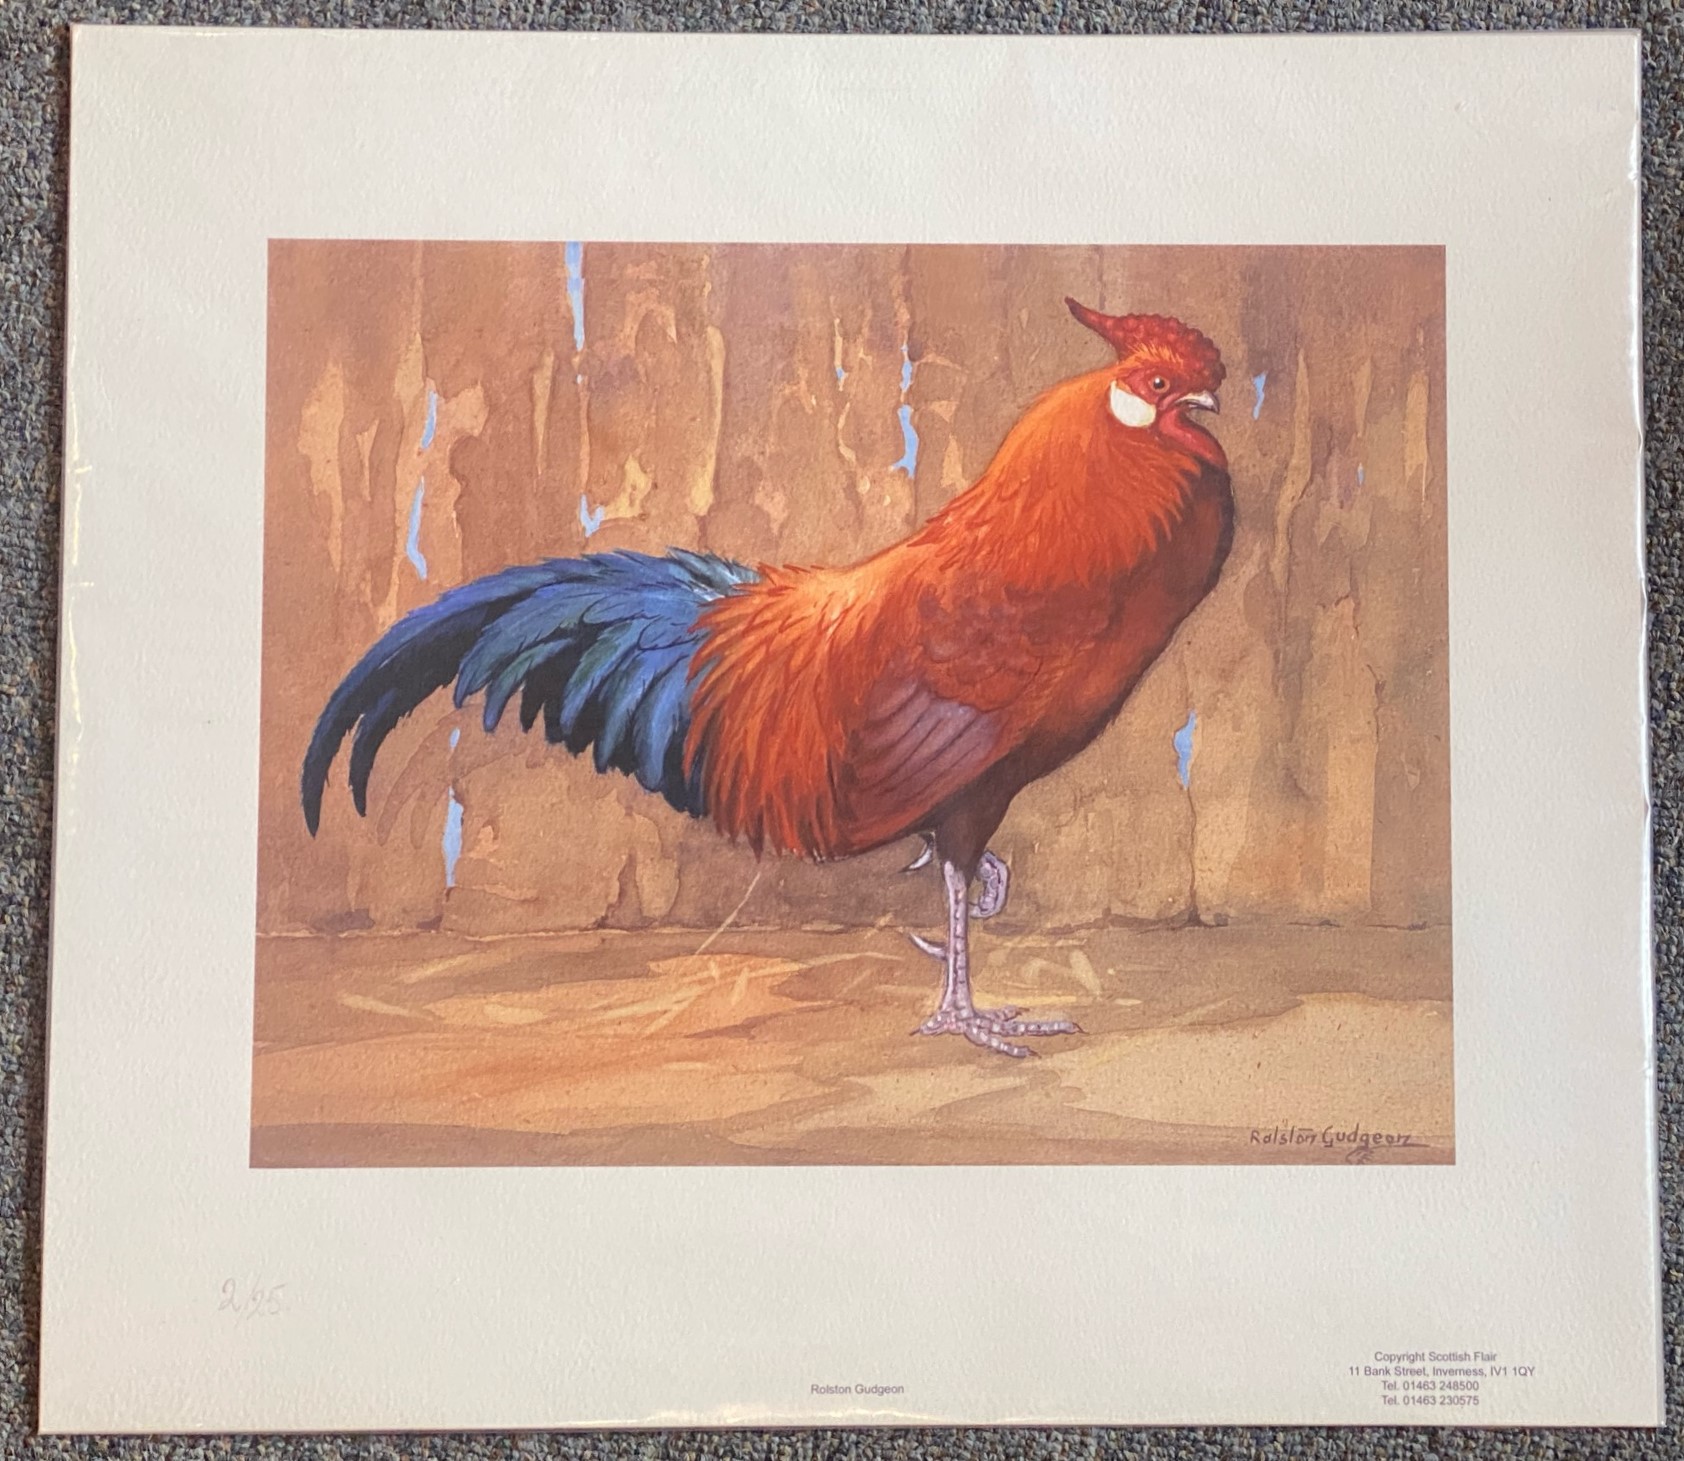 Limited edition Ralston Gudgeon Print "Red Rooster" - Image 2 of 2